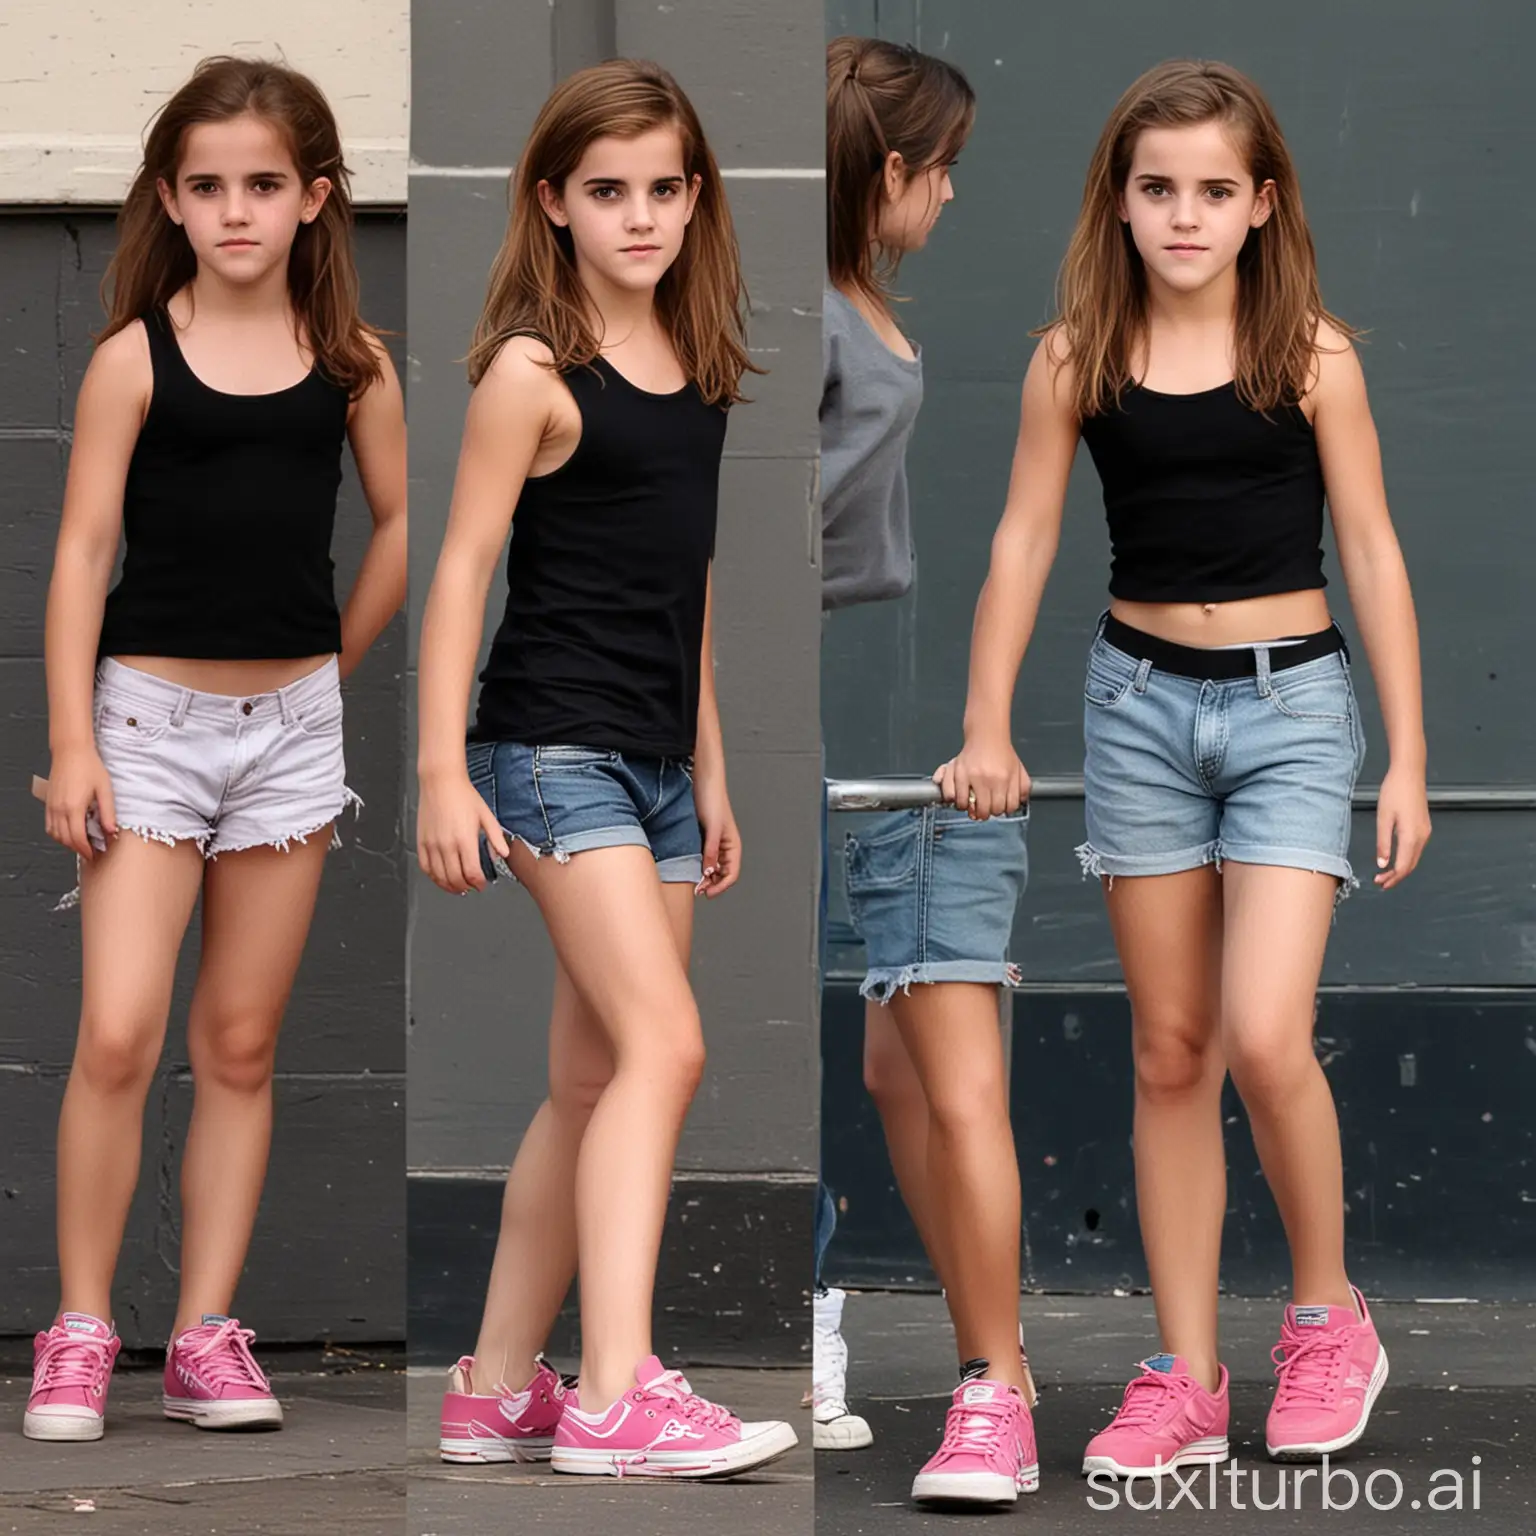 Petite 13 year old Emma Watson with long hair wearing black tank top and jean shorts, and wearing pink and black sneakers